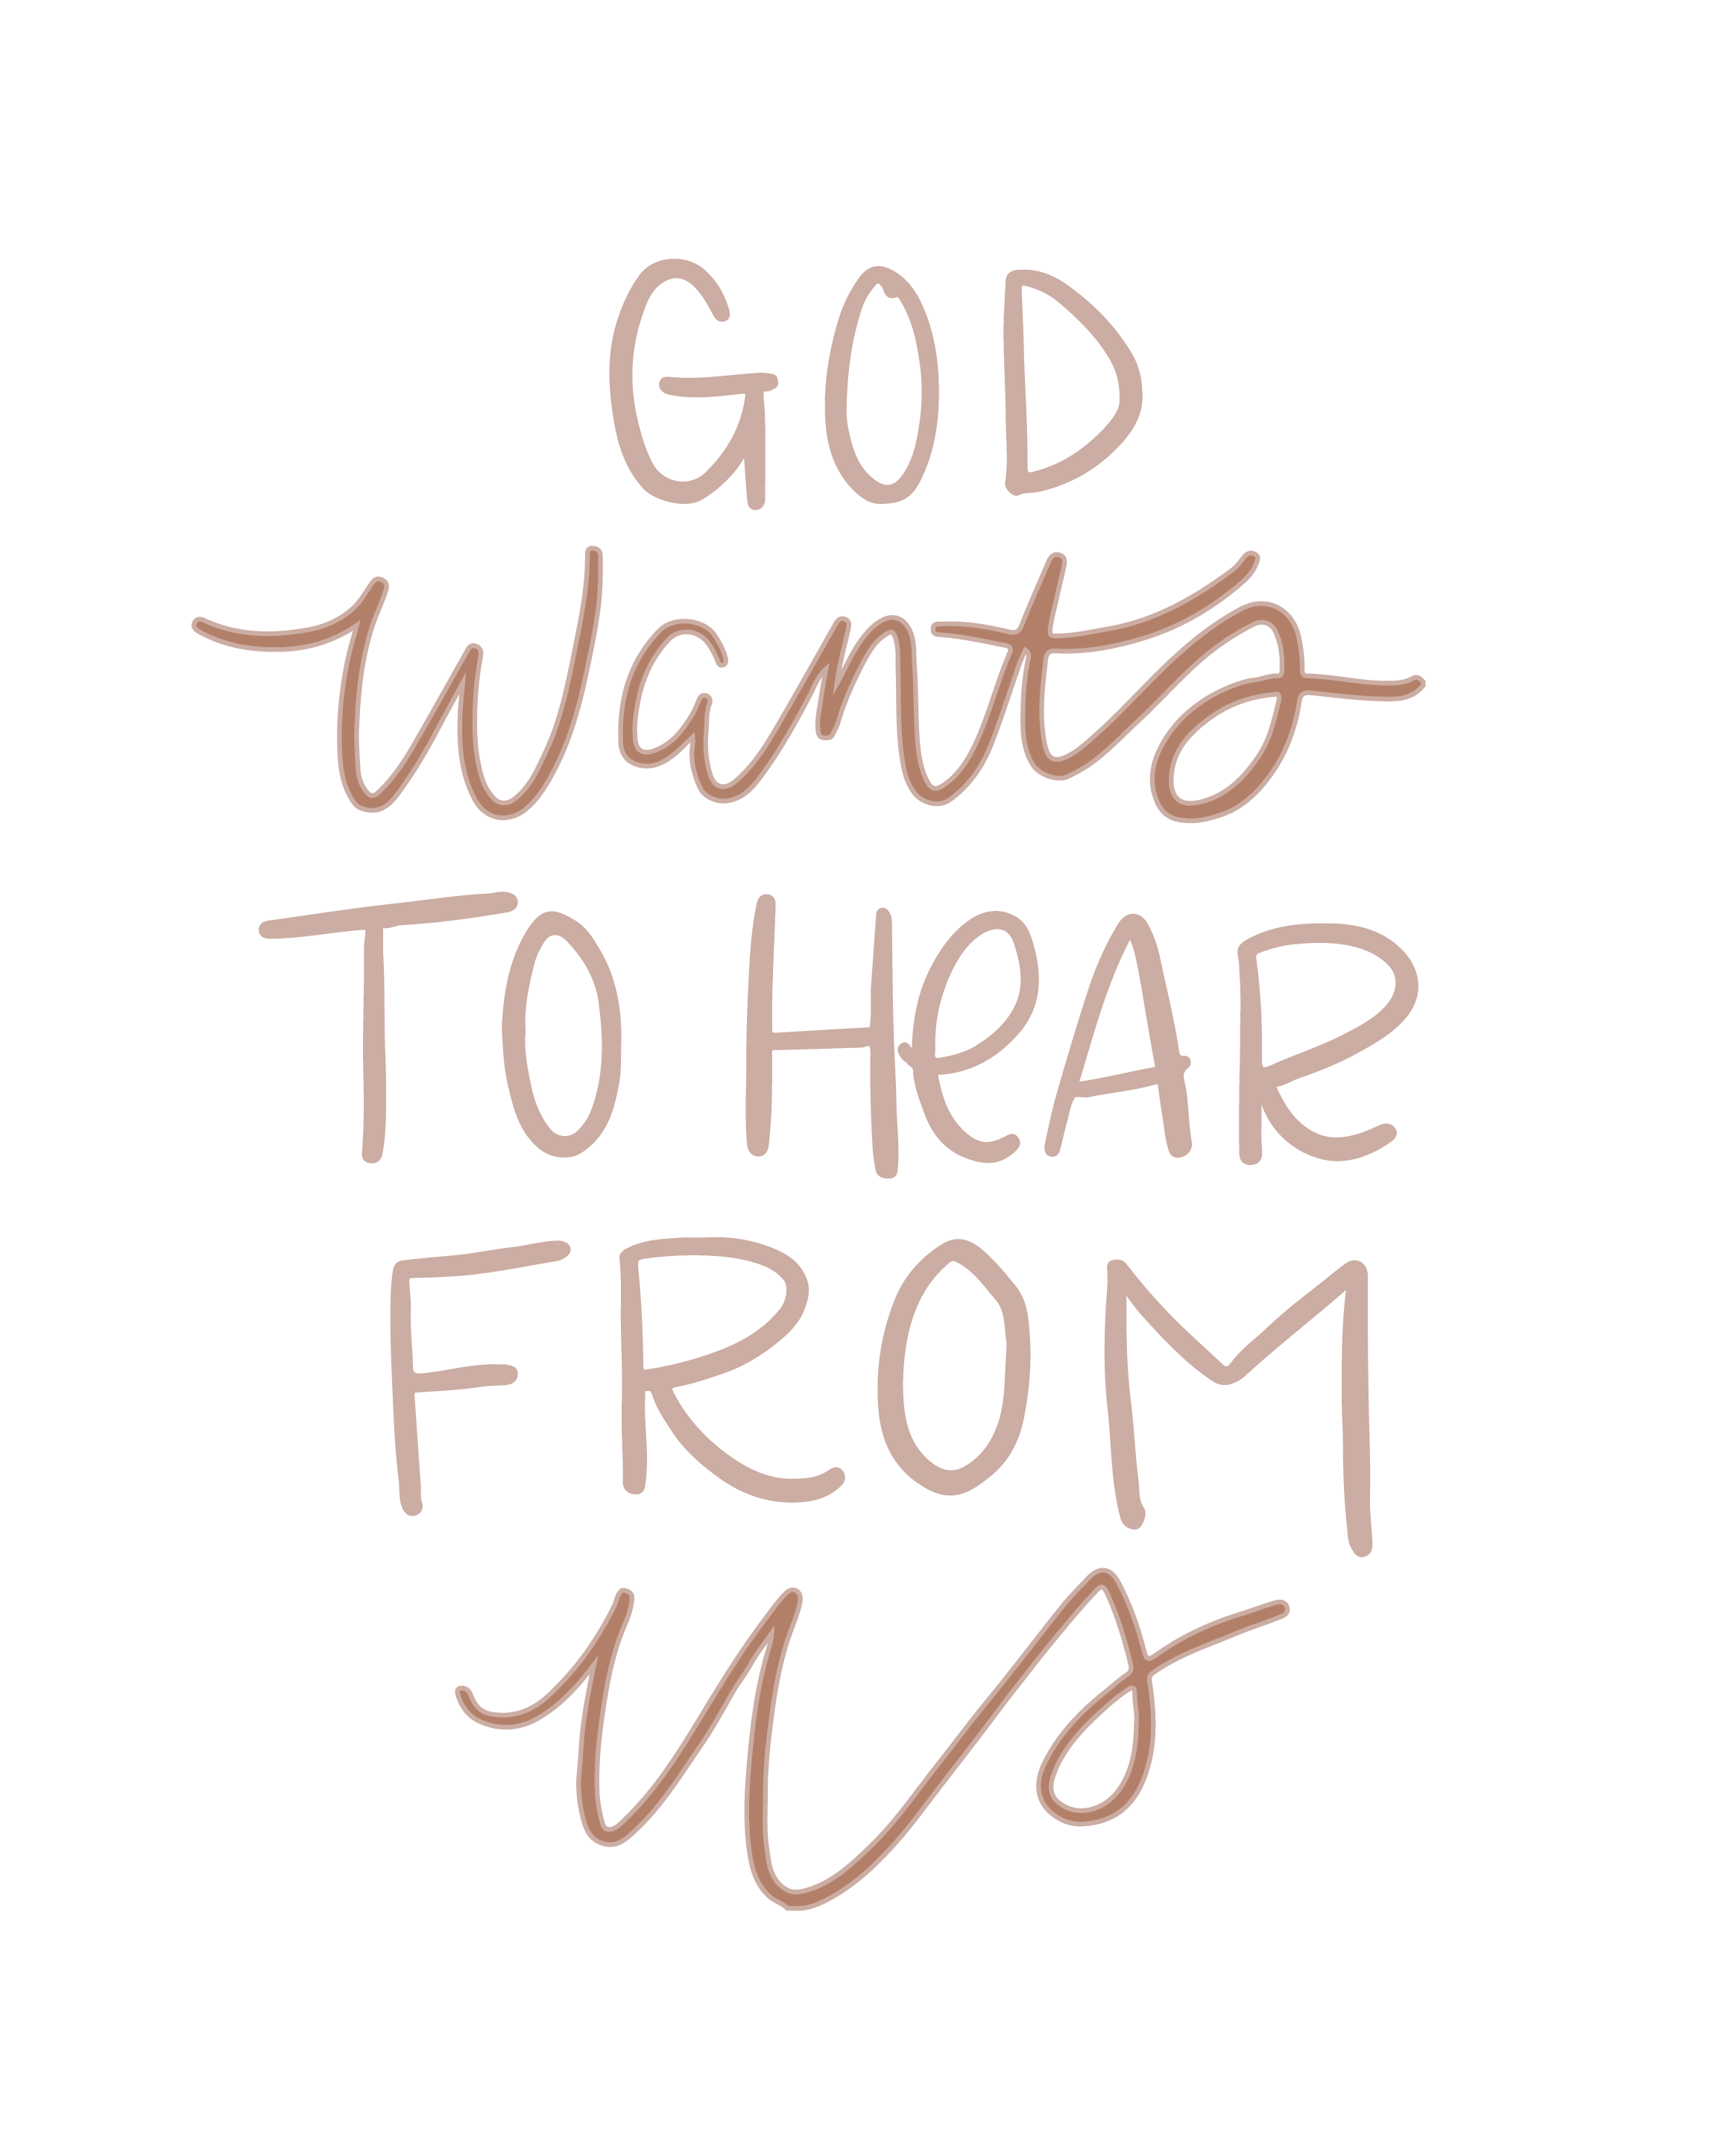 God wants to hear from us | TDGC